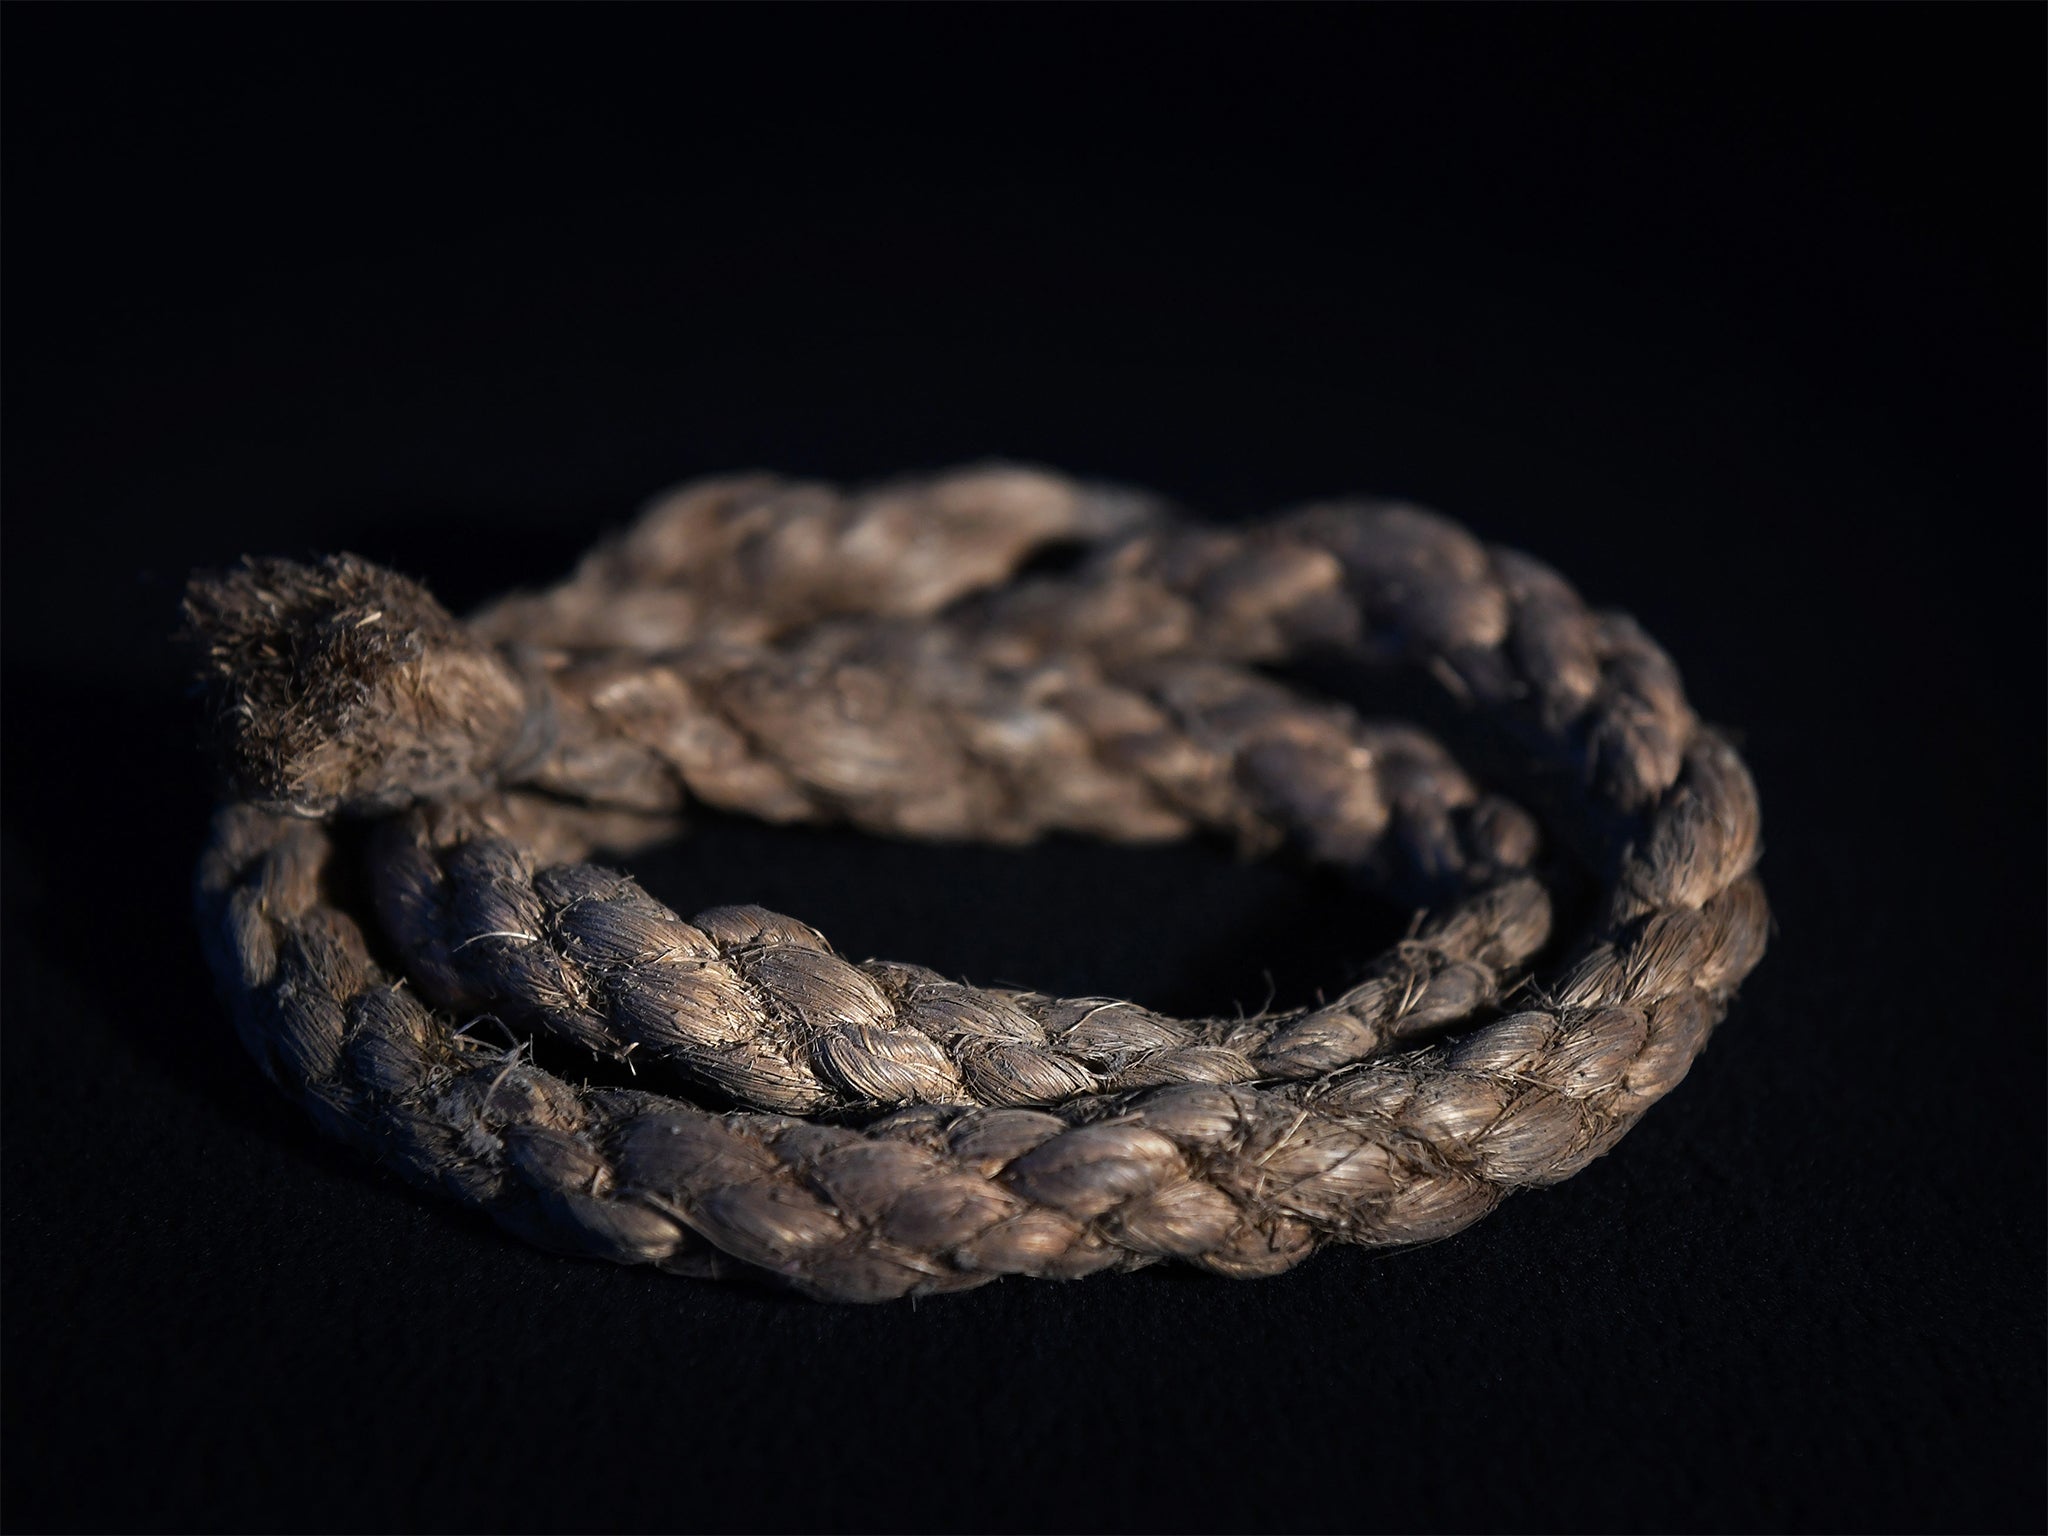 Part of the rope that may have bound Raymond Byrd’s wrists was given to John Johnson at one point during the 30 years he has sought details (Matt McClain for Washington Post)